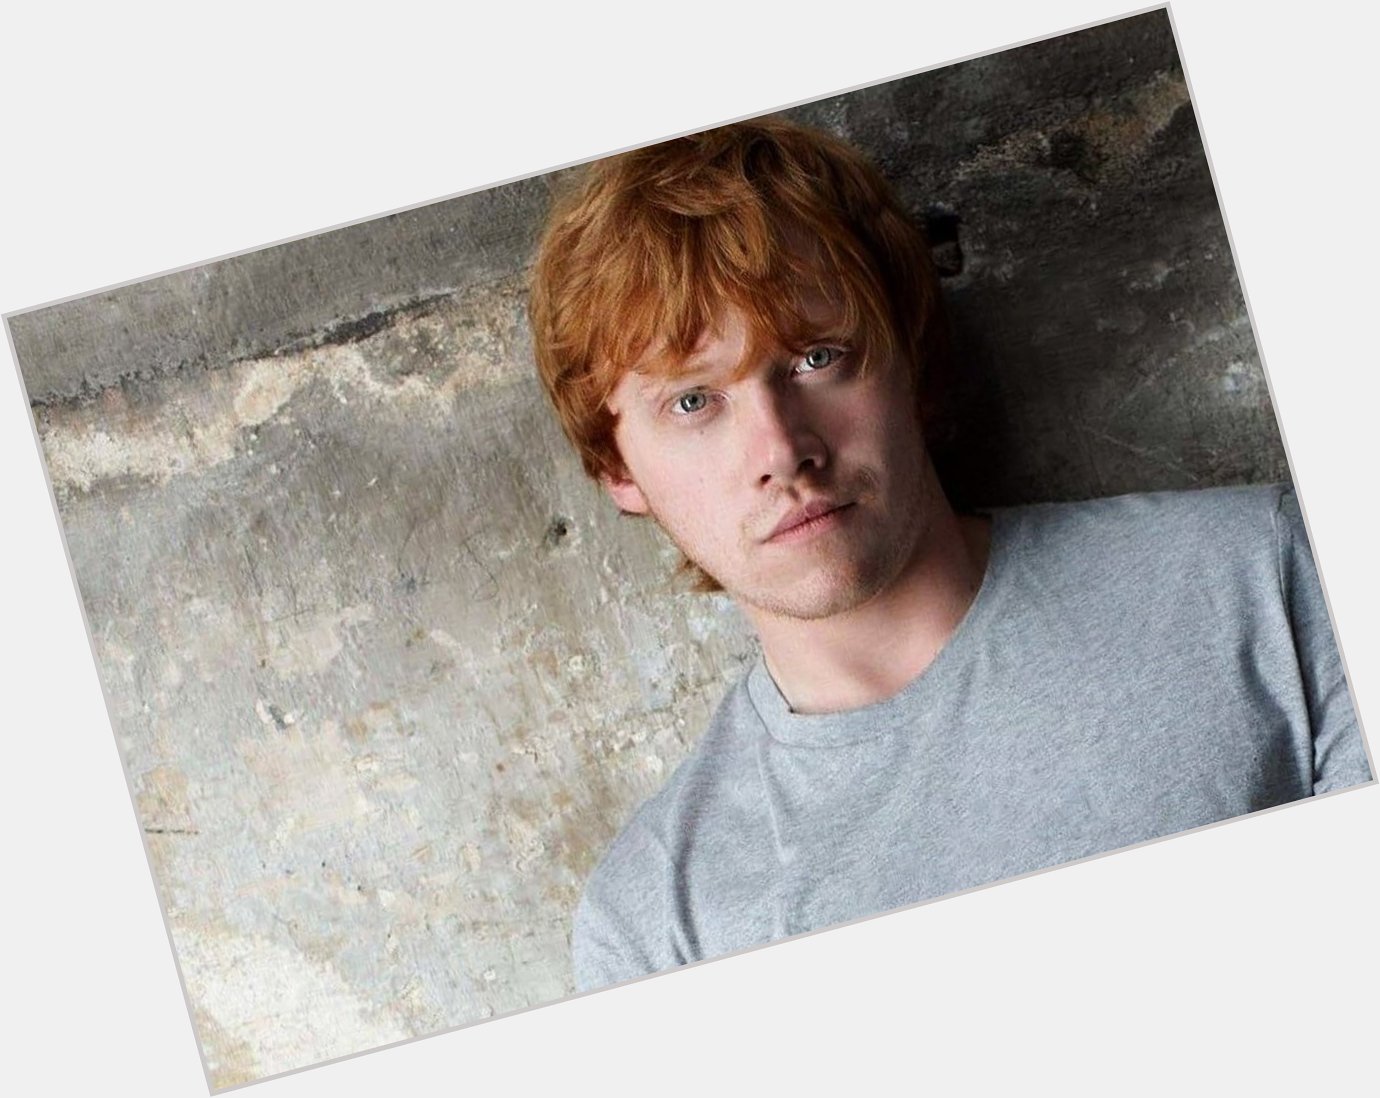 Happy Birthday Rupert Grint you werere the PERFECT Ron Weasley 
Love You so much 